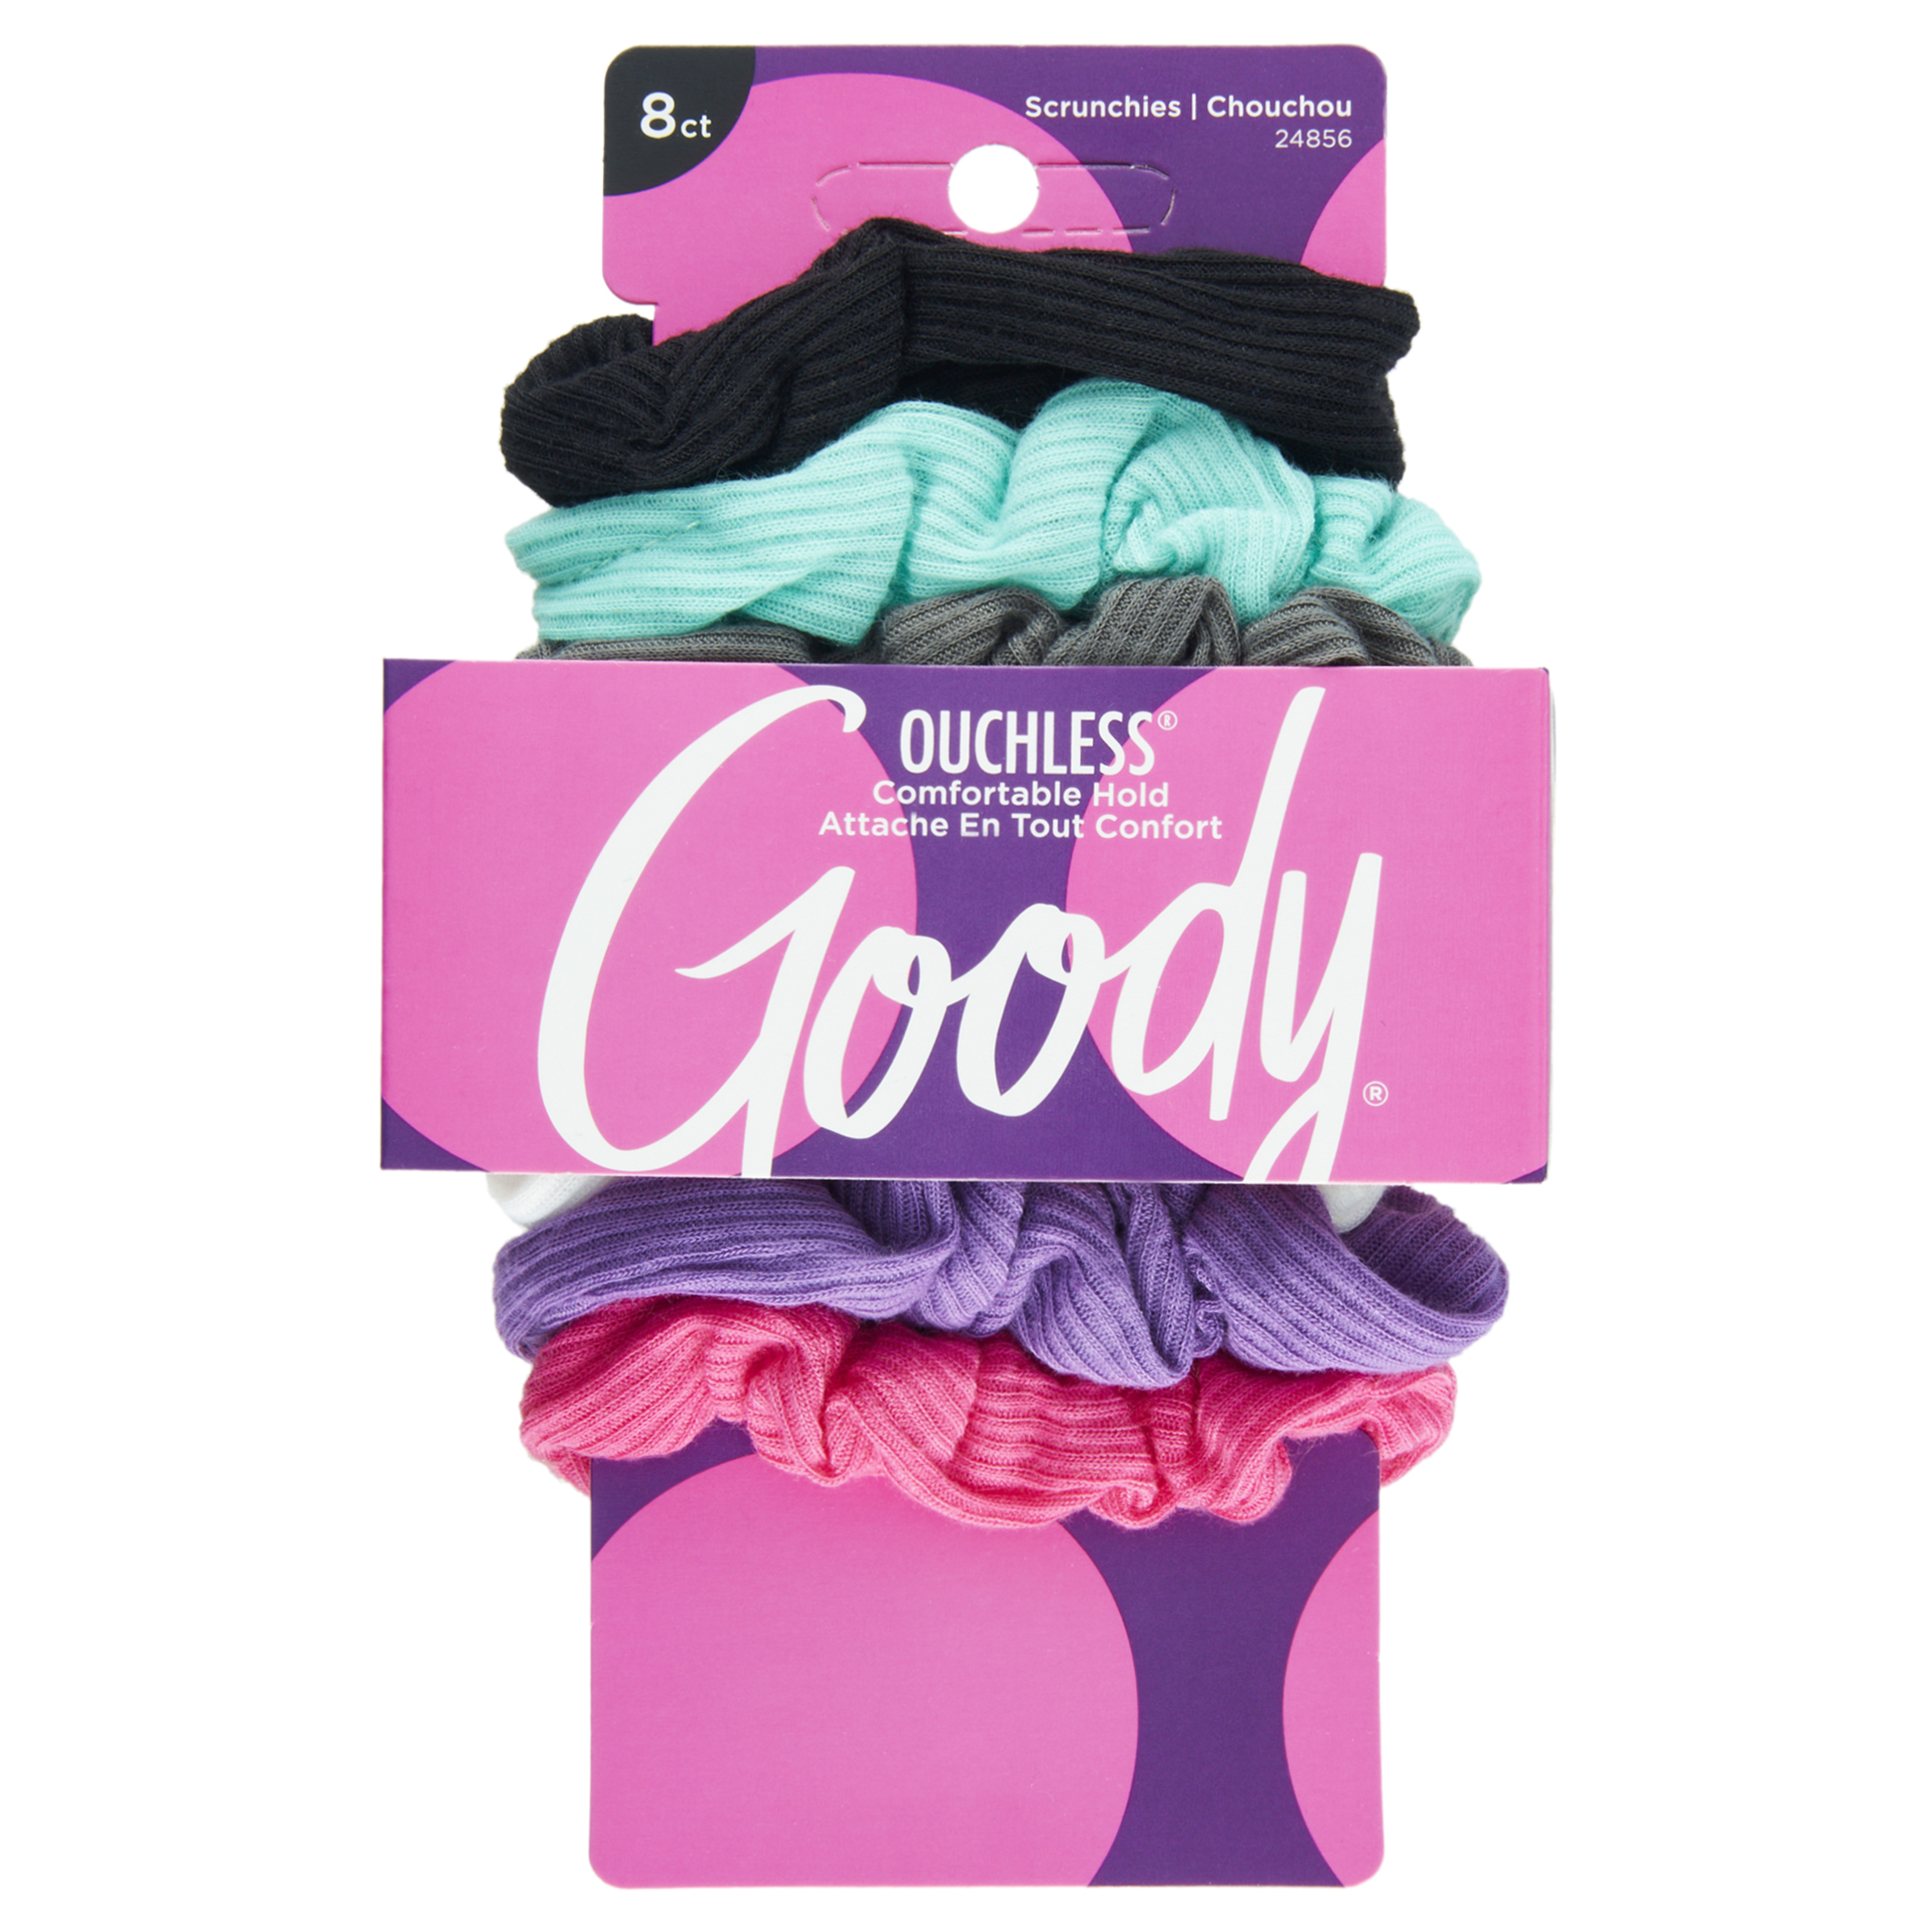 Goody® Ouchless® Scrunchies, Gentle Hair Scrunchies, Neon Lights, 8 Ct - image 1 of 3